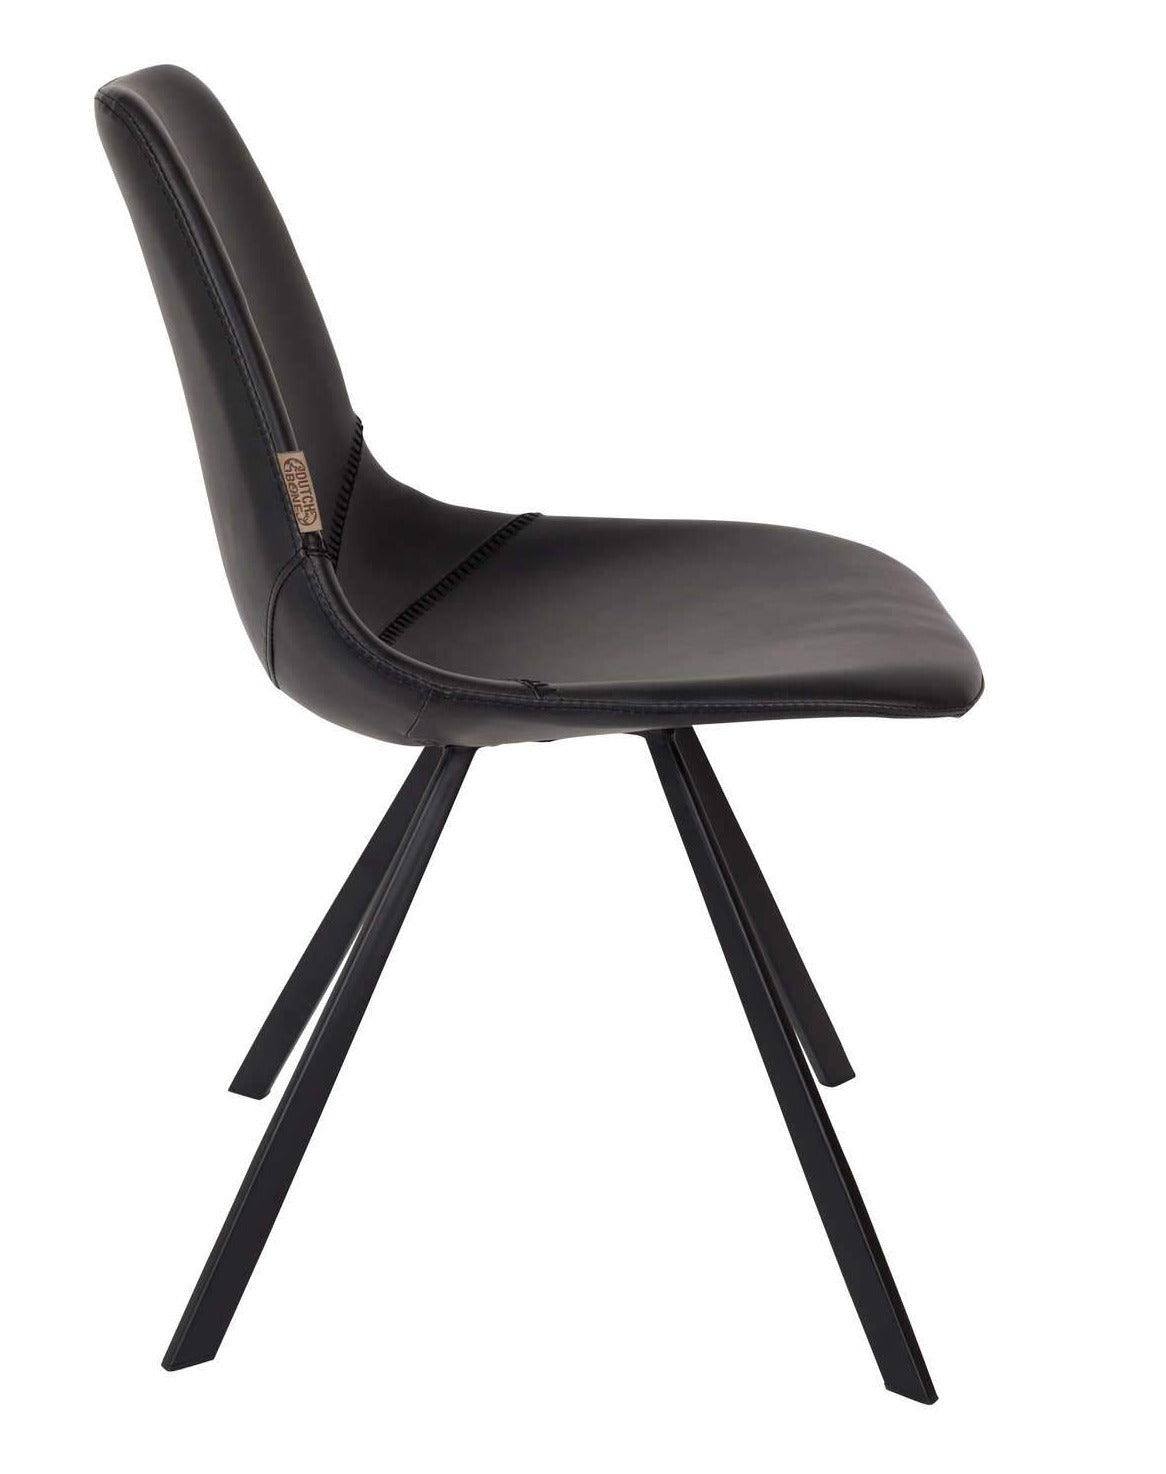 FRANKY chair eco leather black - Eye on Design